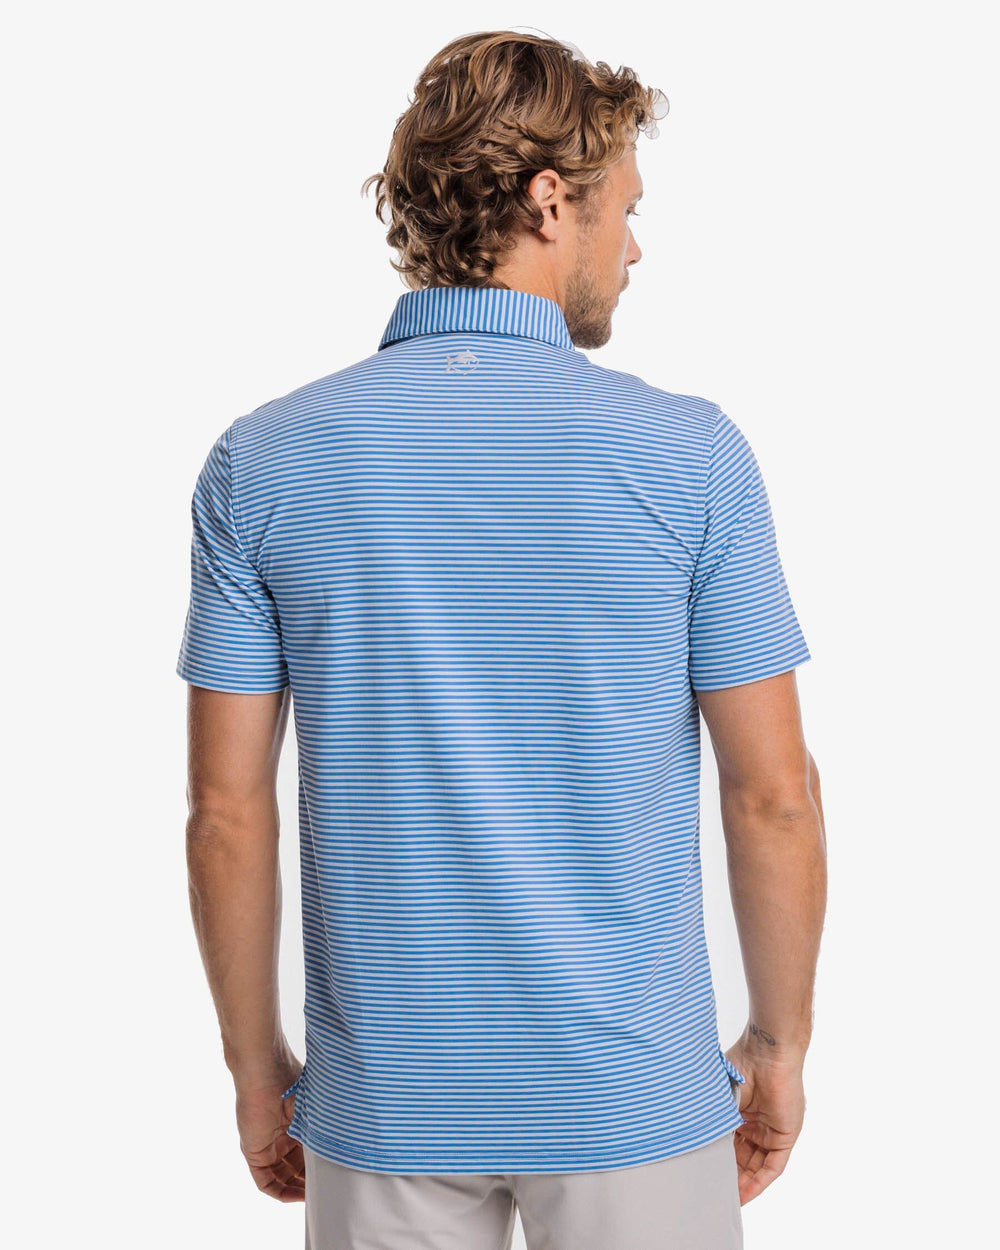 The back view of the Southern Tide Shores Stripe brrr eeze Performance Polo Shirt by Southern Tide - Slate Grey